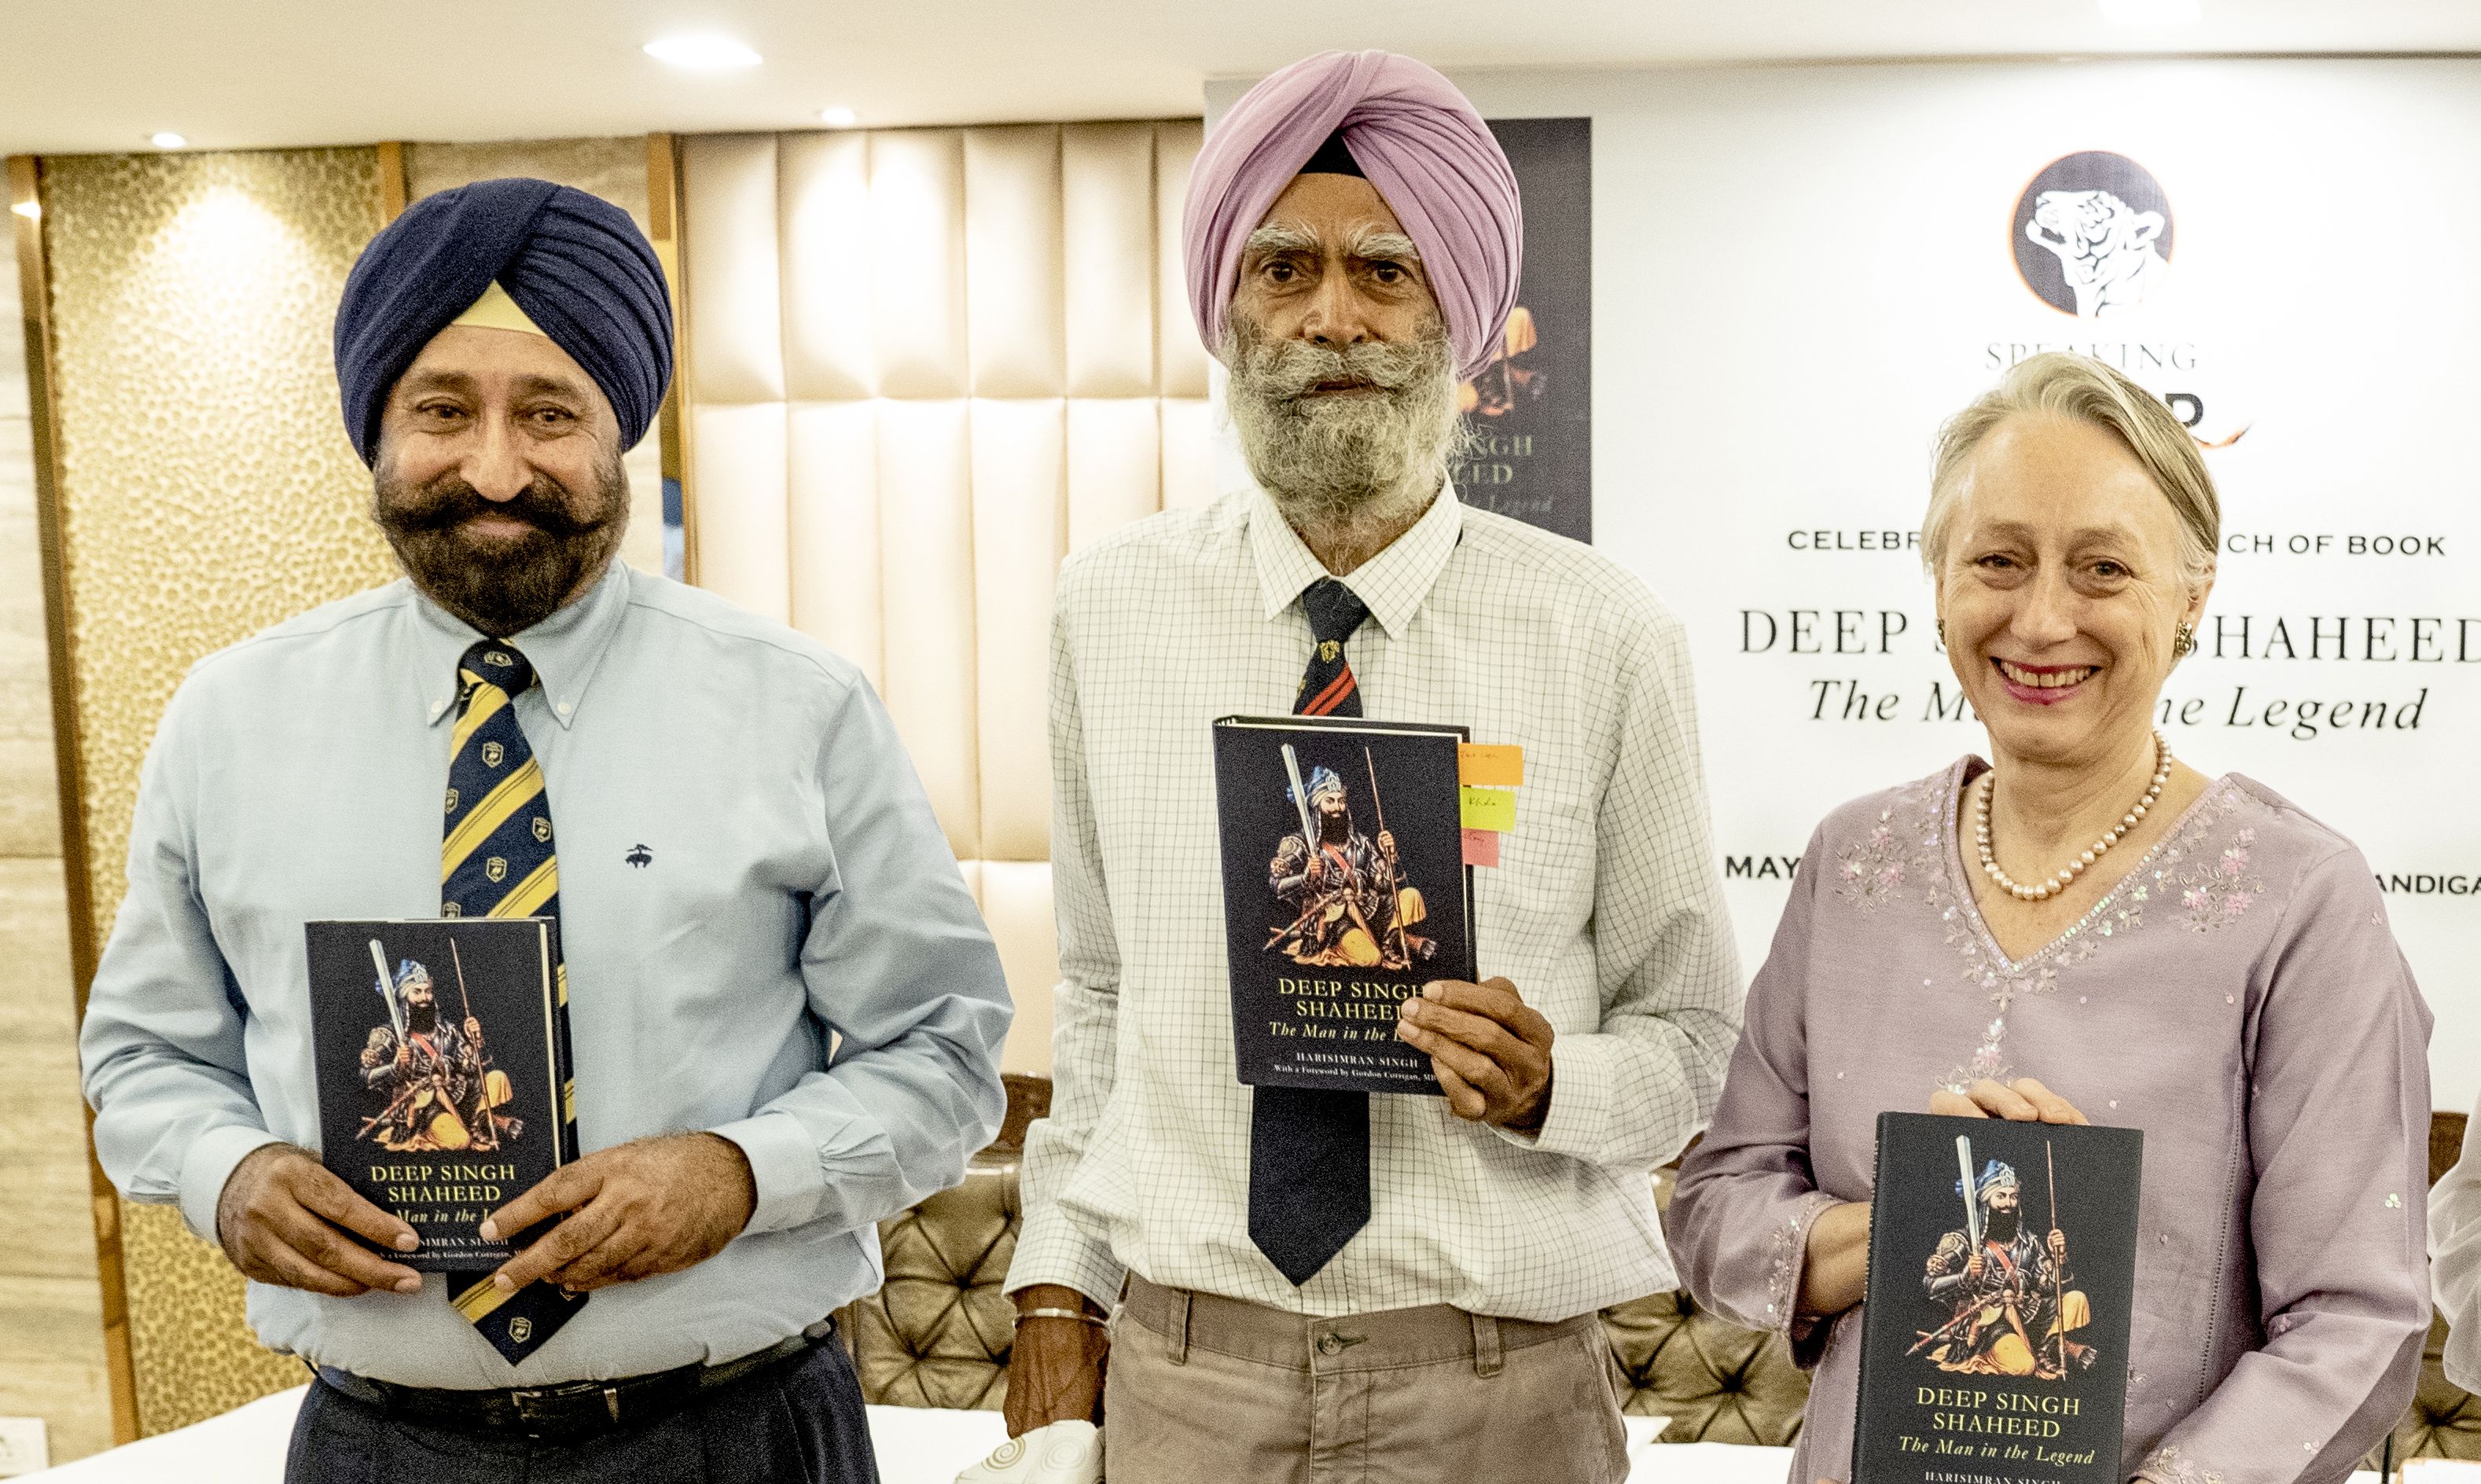 Harisimran Singh's book 'Deep Singh Shaheed: The Man in the Legend' connects some important dots in Sikh history